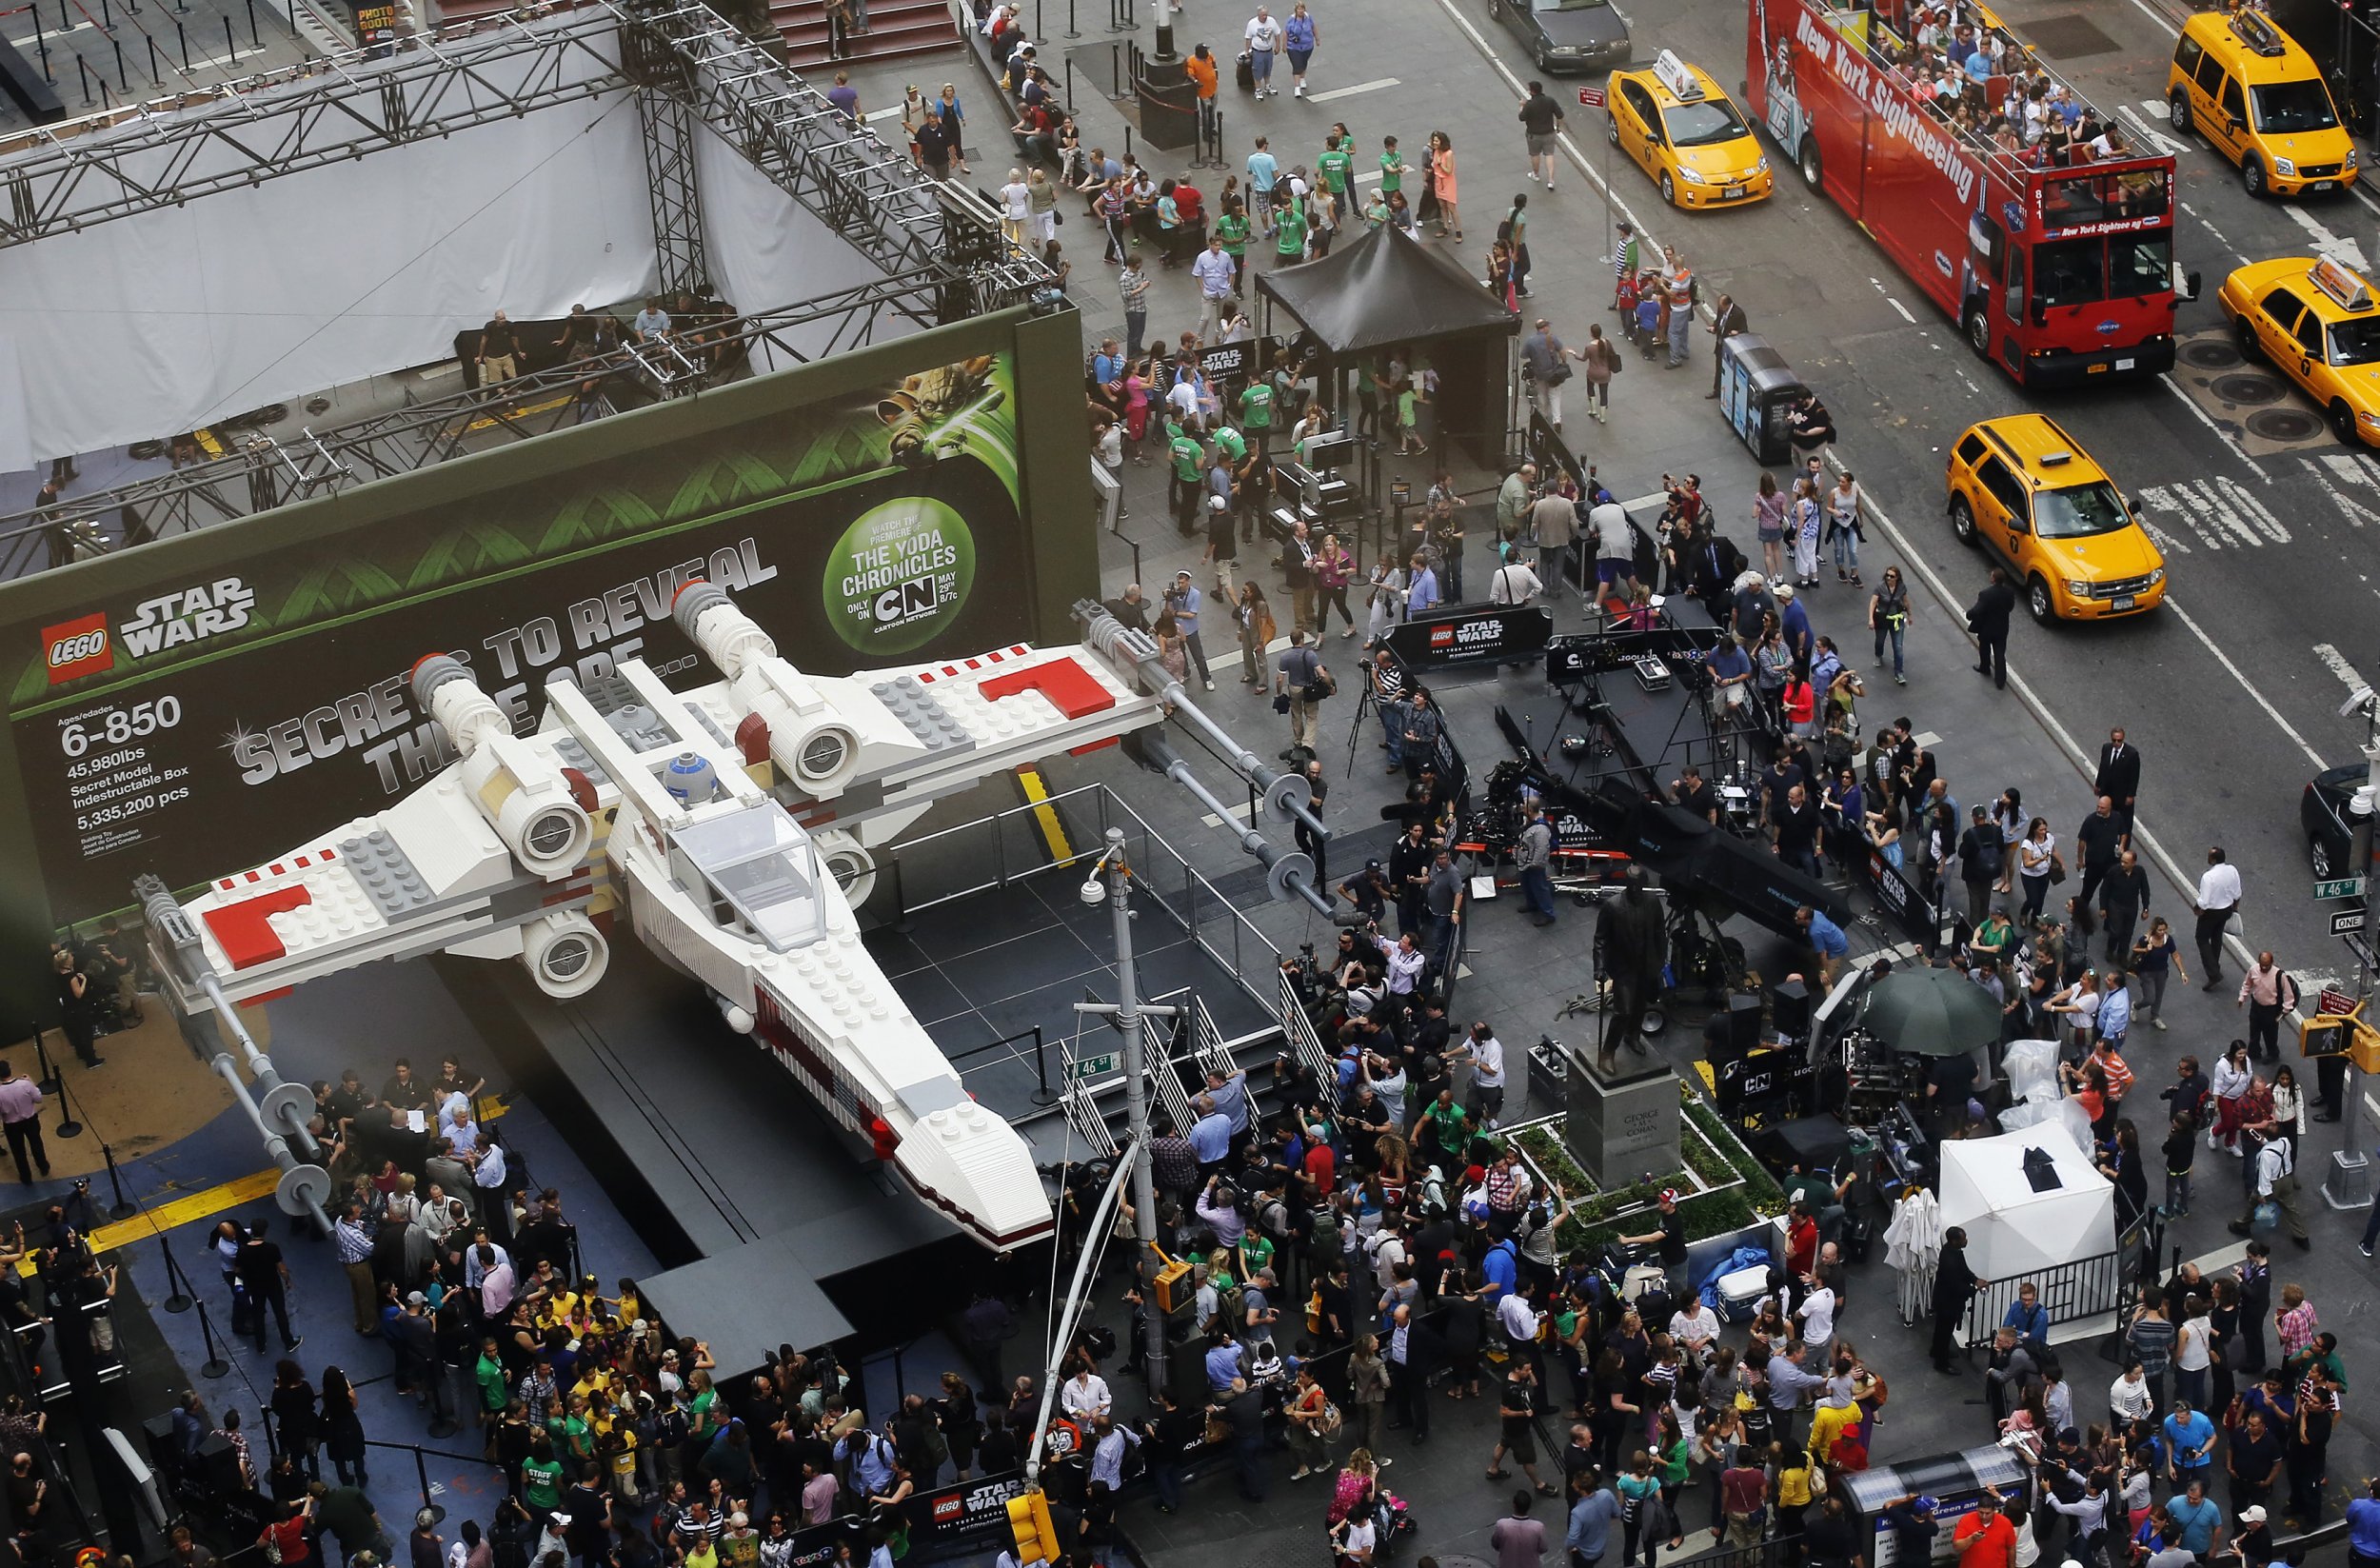 Star Wars X wing in Times Square surrounded by crowds